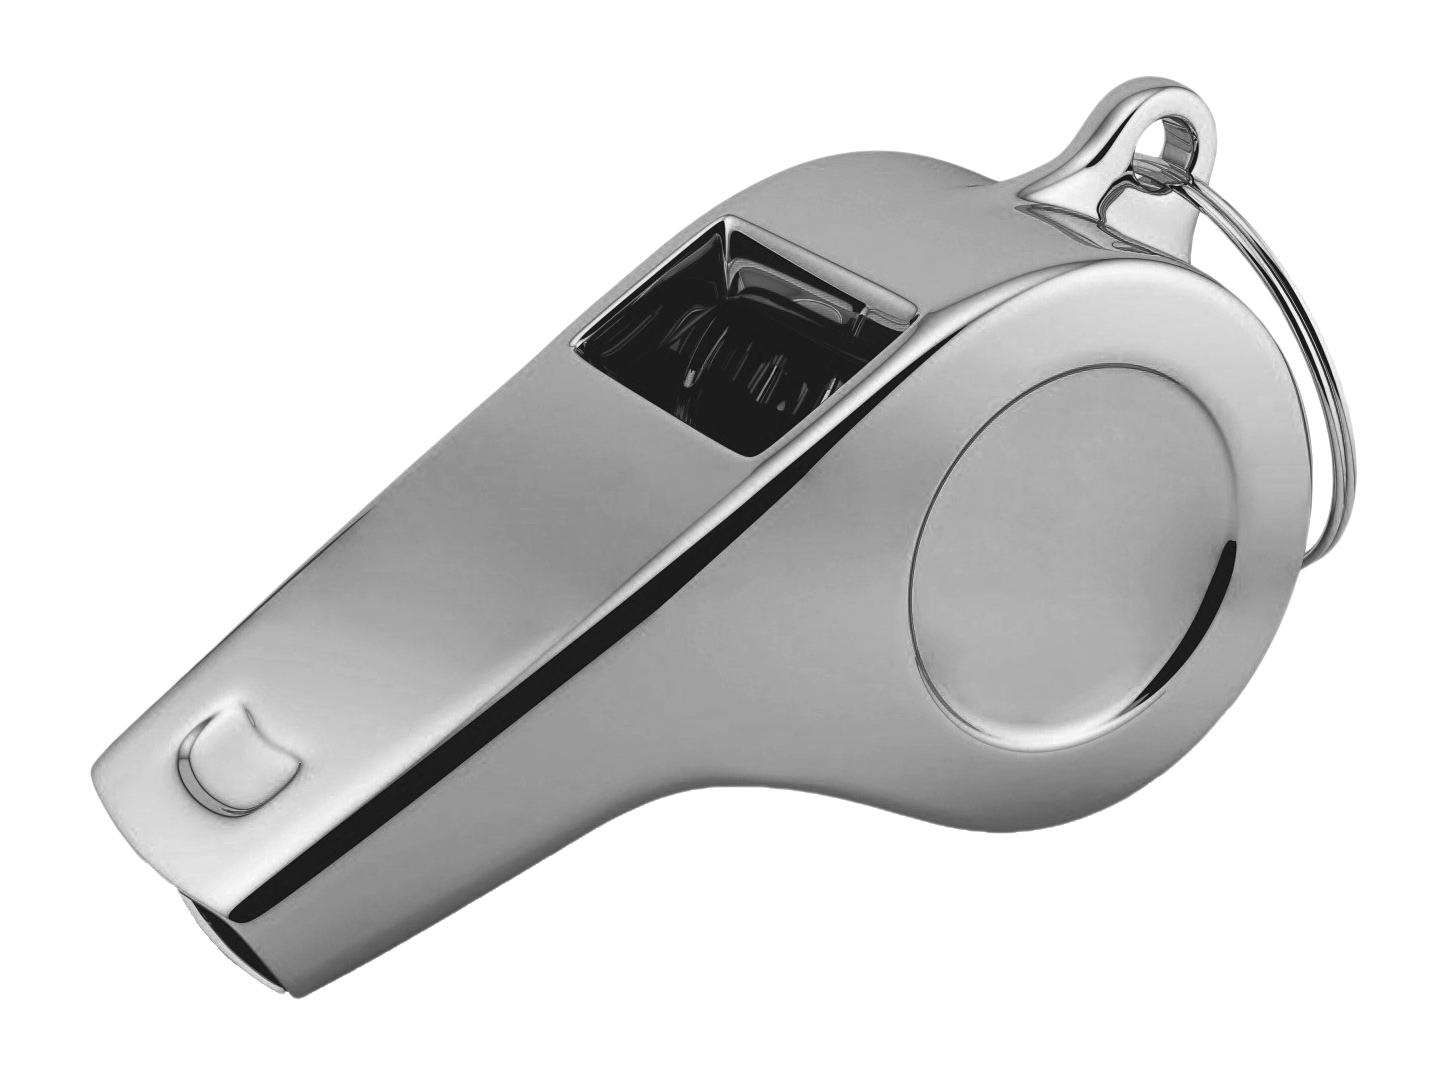 Whistle, Download PNG